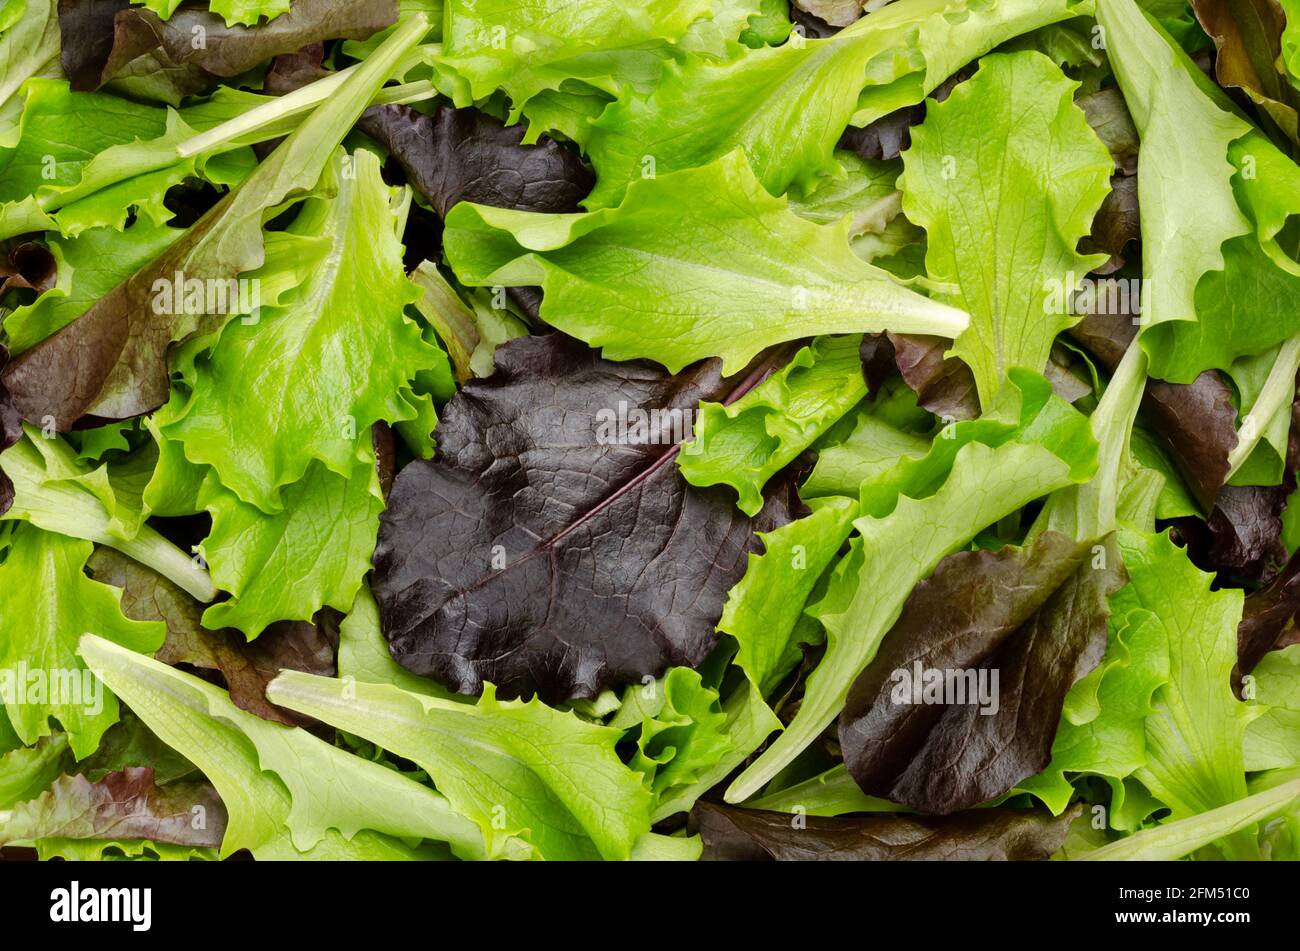 Fresh picked loose leaf lettuce, red and green leaved pluck lettuce, close-up from above. Also known as pick or looseleaf lettuce, used for salads. Stock Photo